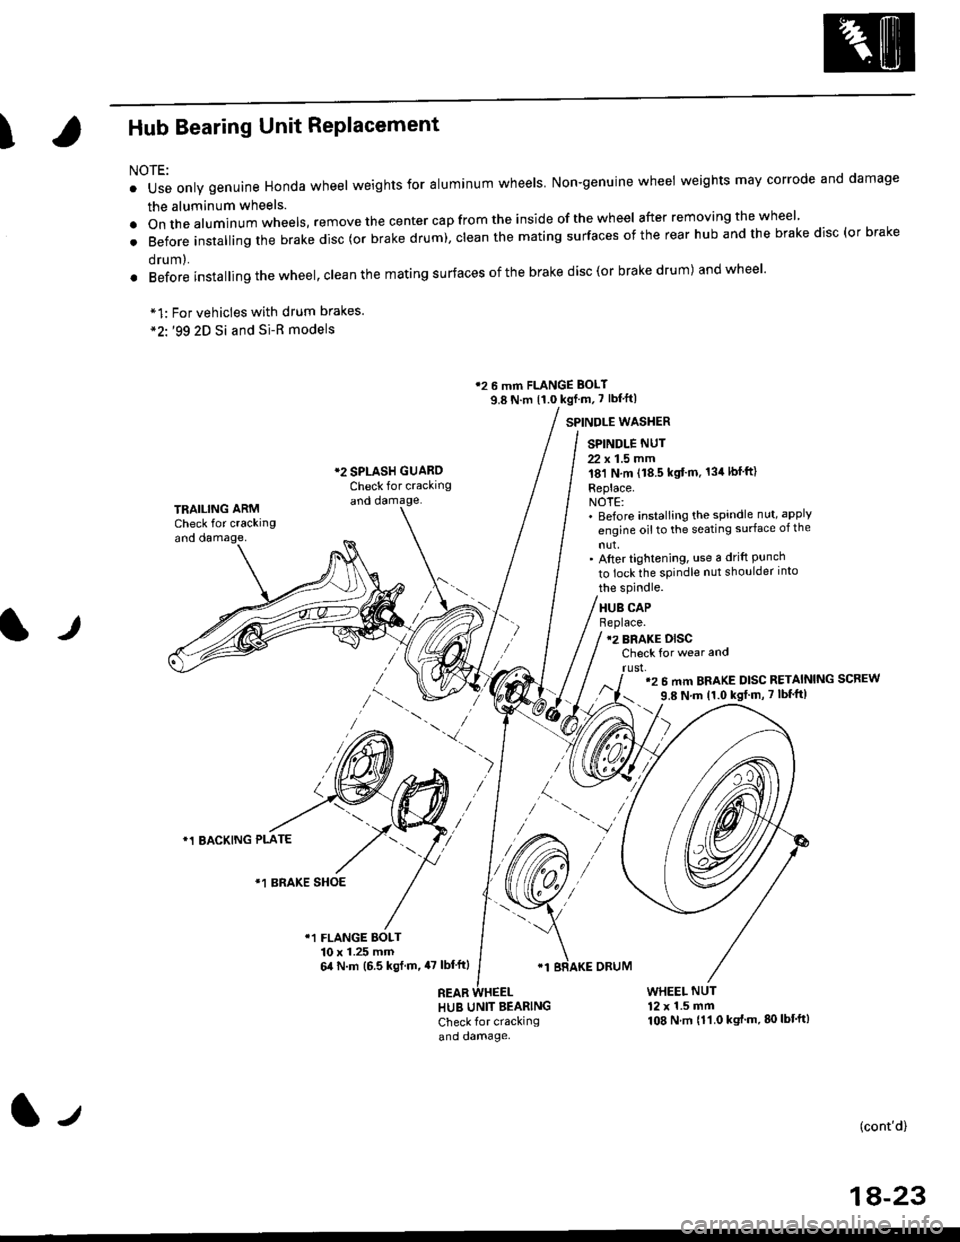 HONDA CIVIC 1996 6.G User Guide IHub Bearing Unit RePlacement
For vehicles with drum brakes.99 2D Si and Si-B models
NOTE:
o Use only genuine Honda wheel weights for aluminum wheels Non-genuine wheel weights may corrode and damage
